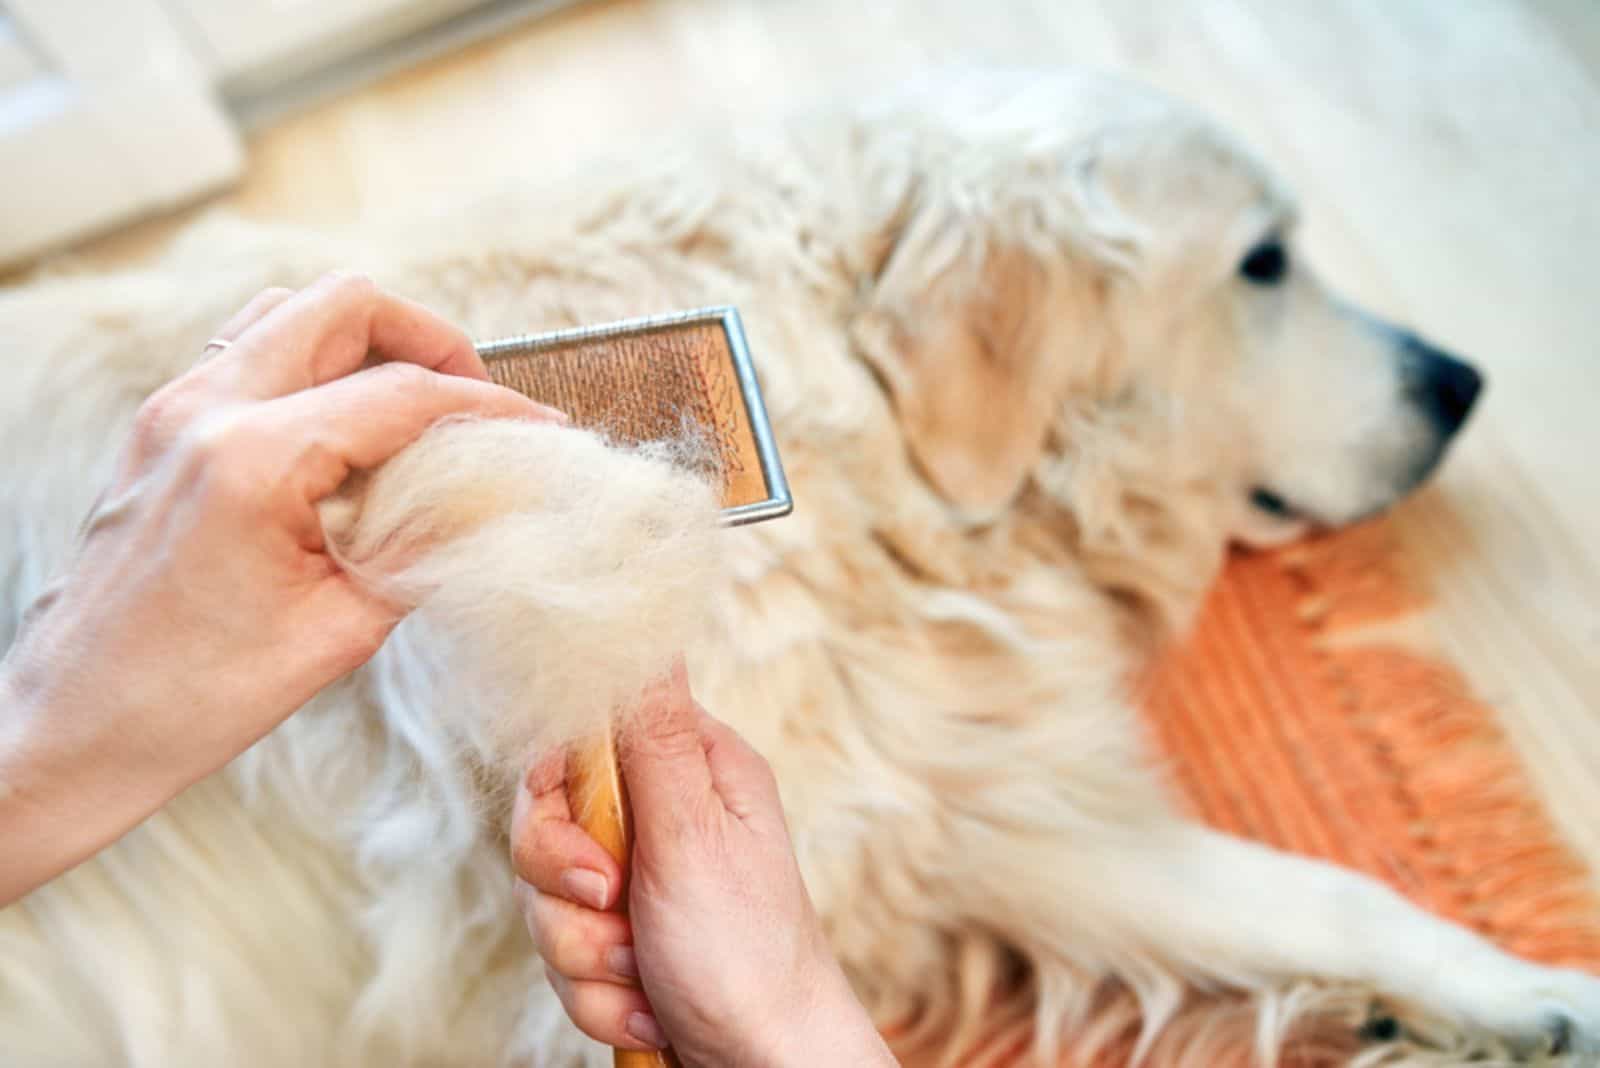 woman combs golden retriever dog with a metal grooming comb